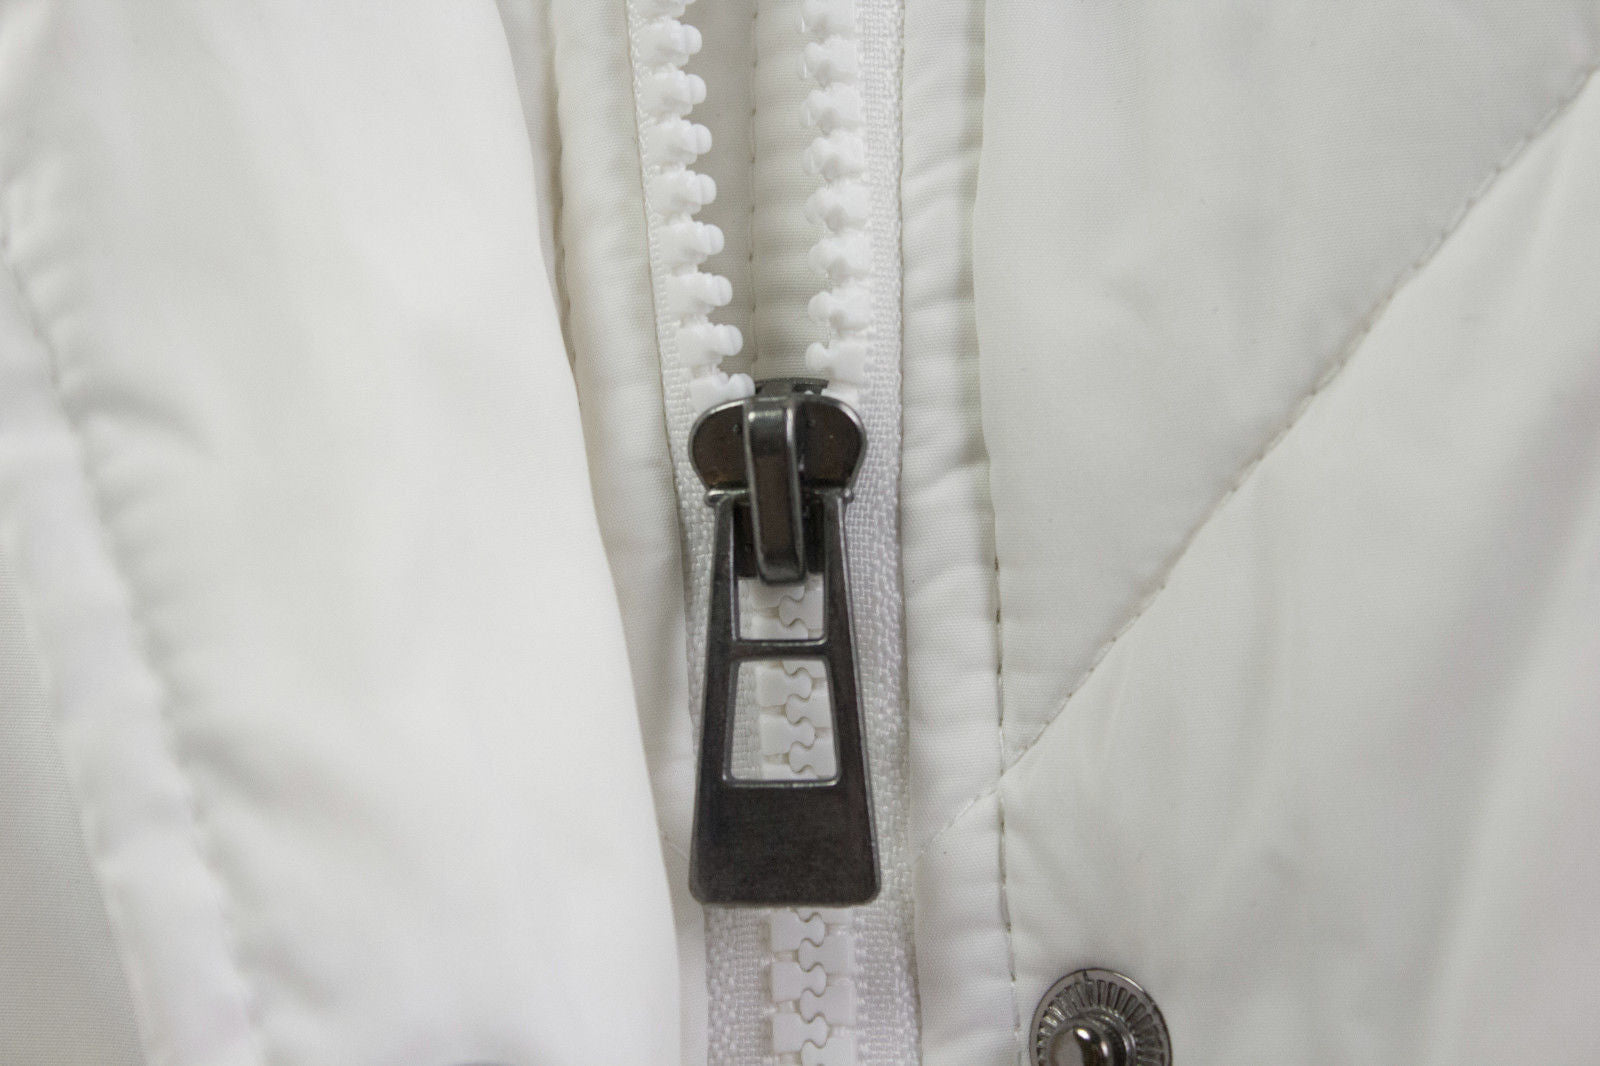 Piazza Italia White Quilted Down Belted Parka Coat, S - secondfirst